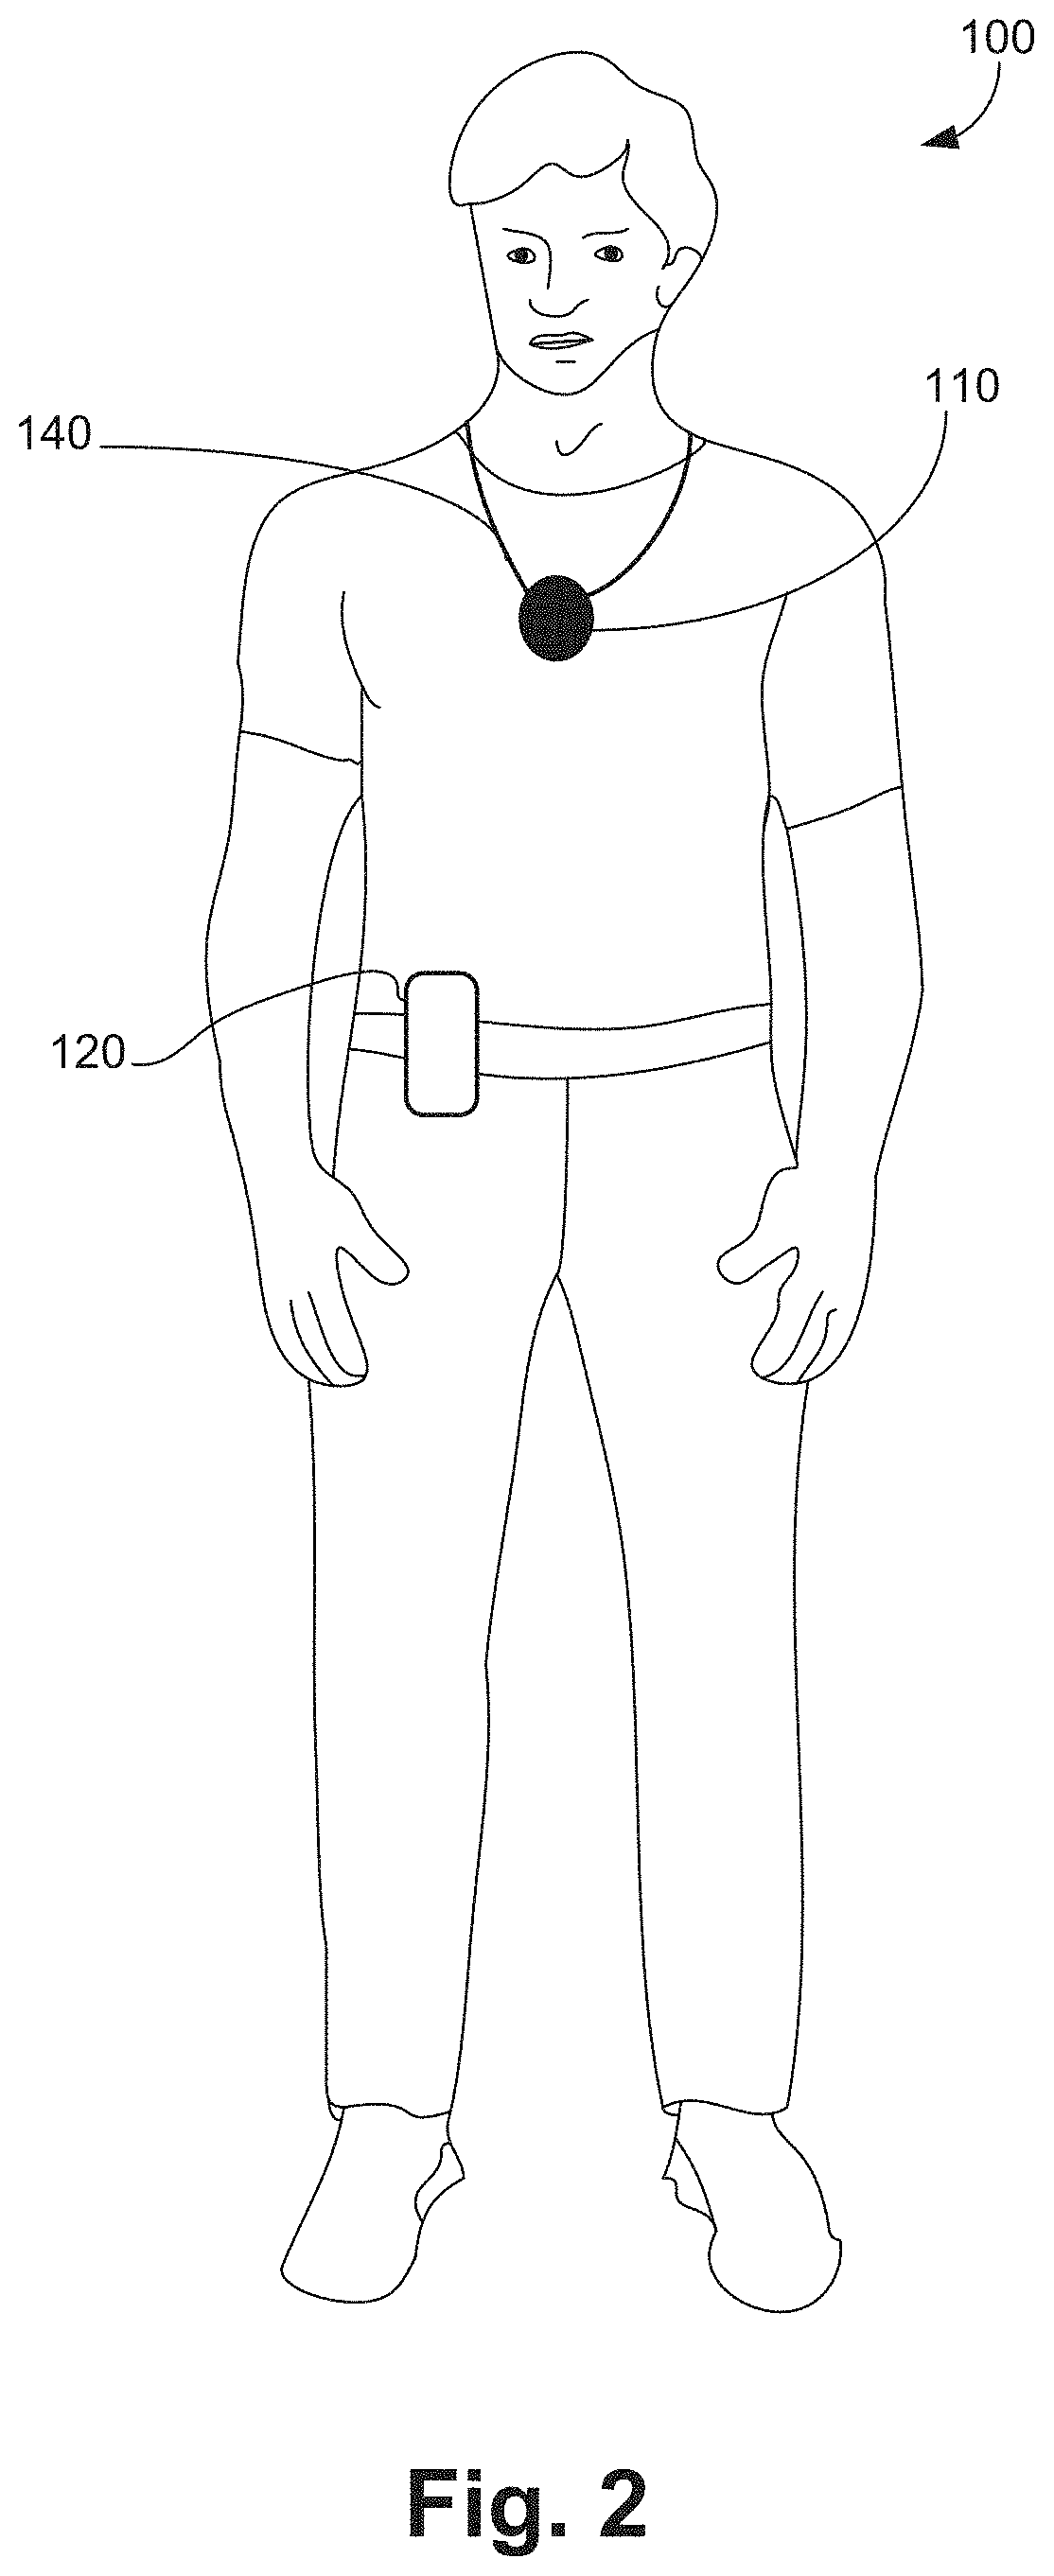 Wearable apparatus and methods for processing audio signals